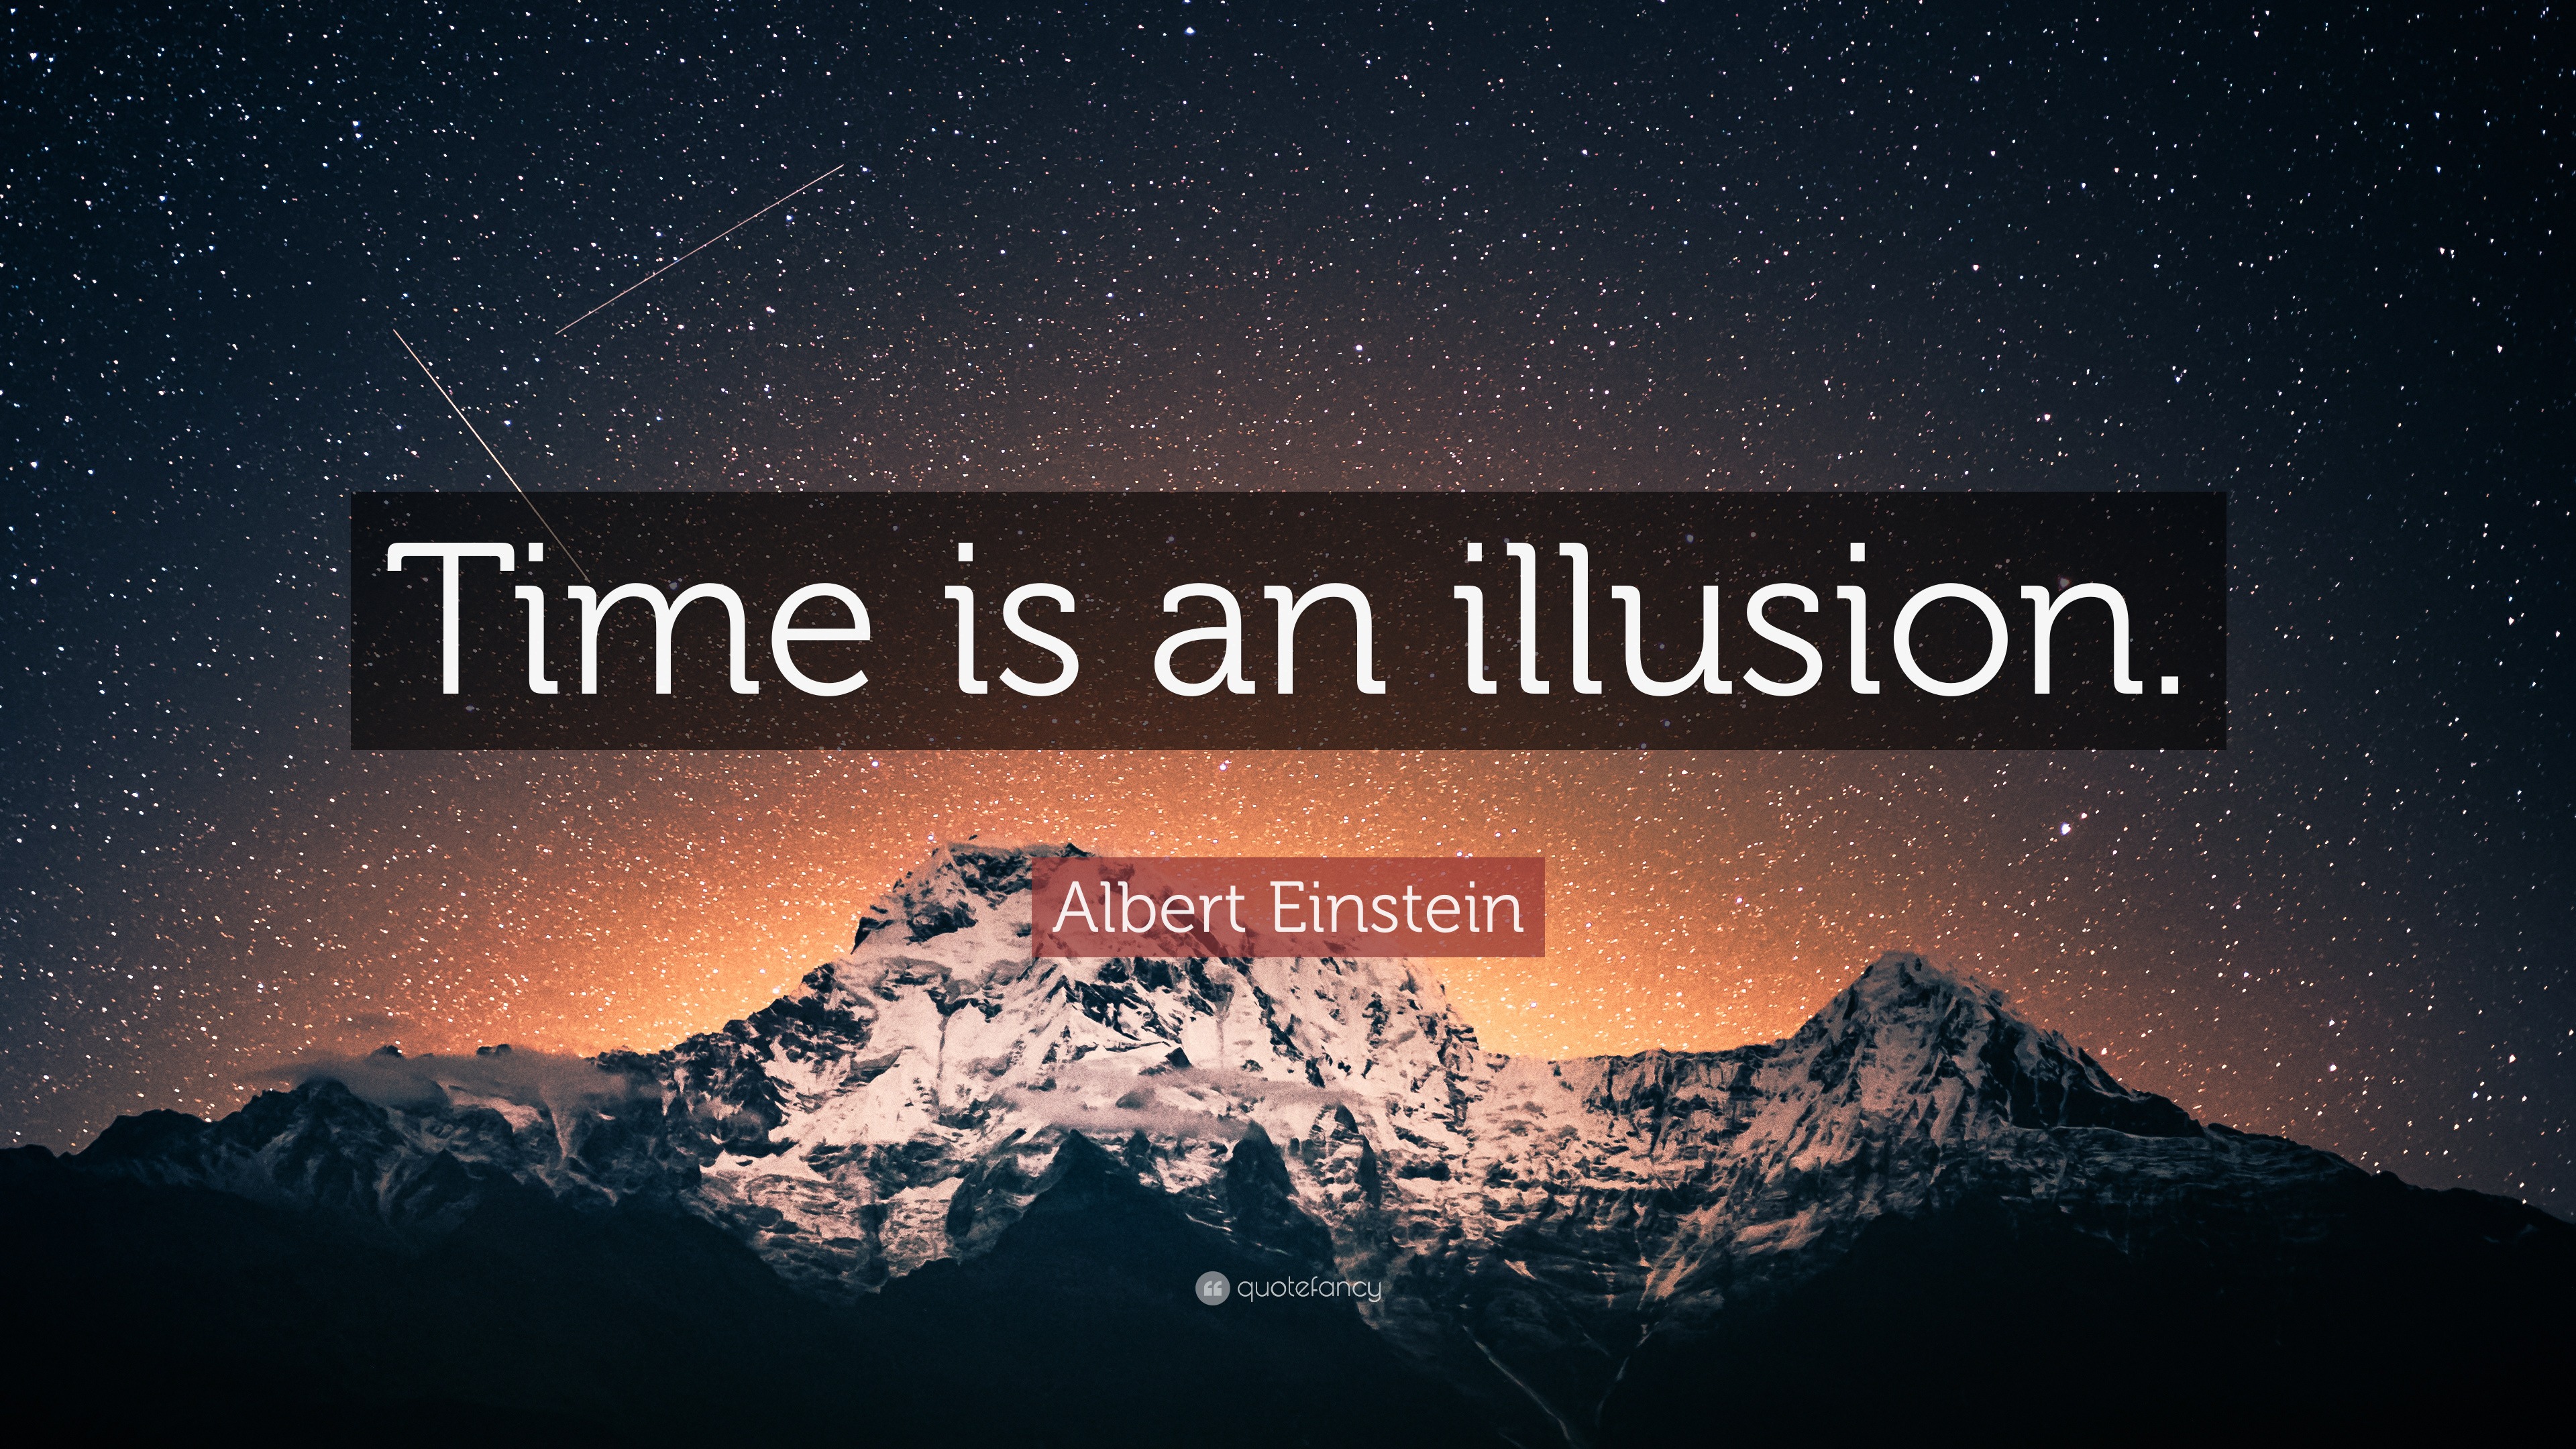 Albert Einstein Quote: “Time is an illusion.” (28 wallpapers) - Quotefancy